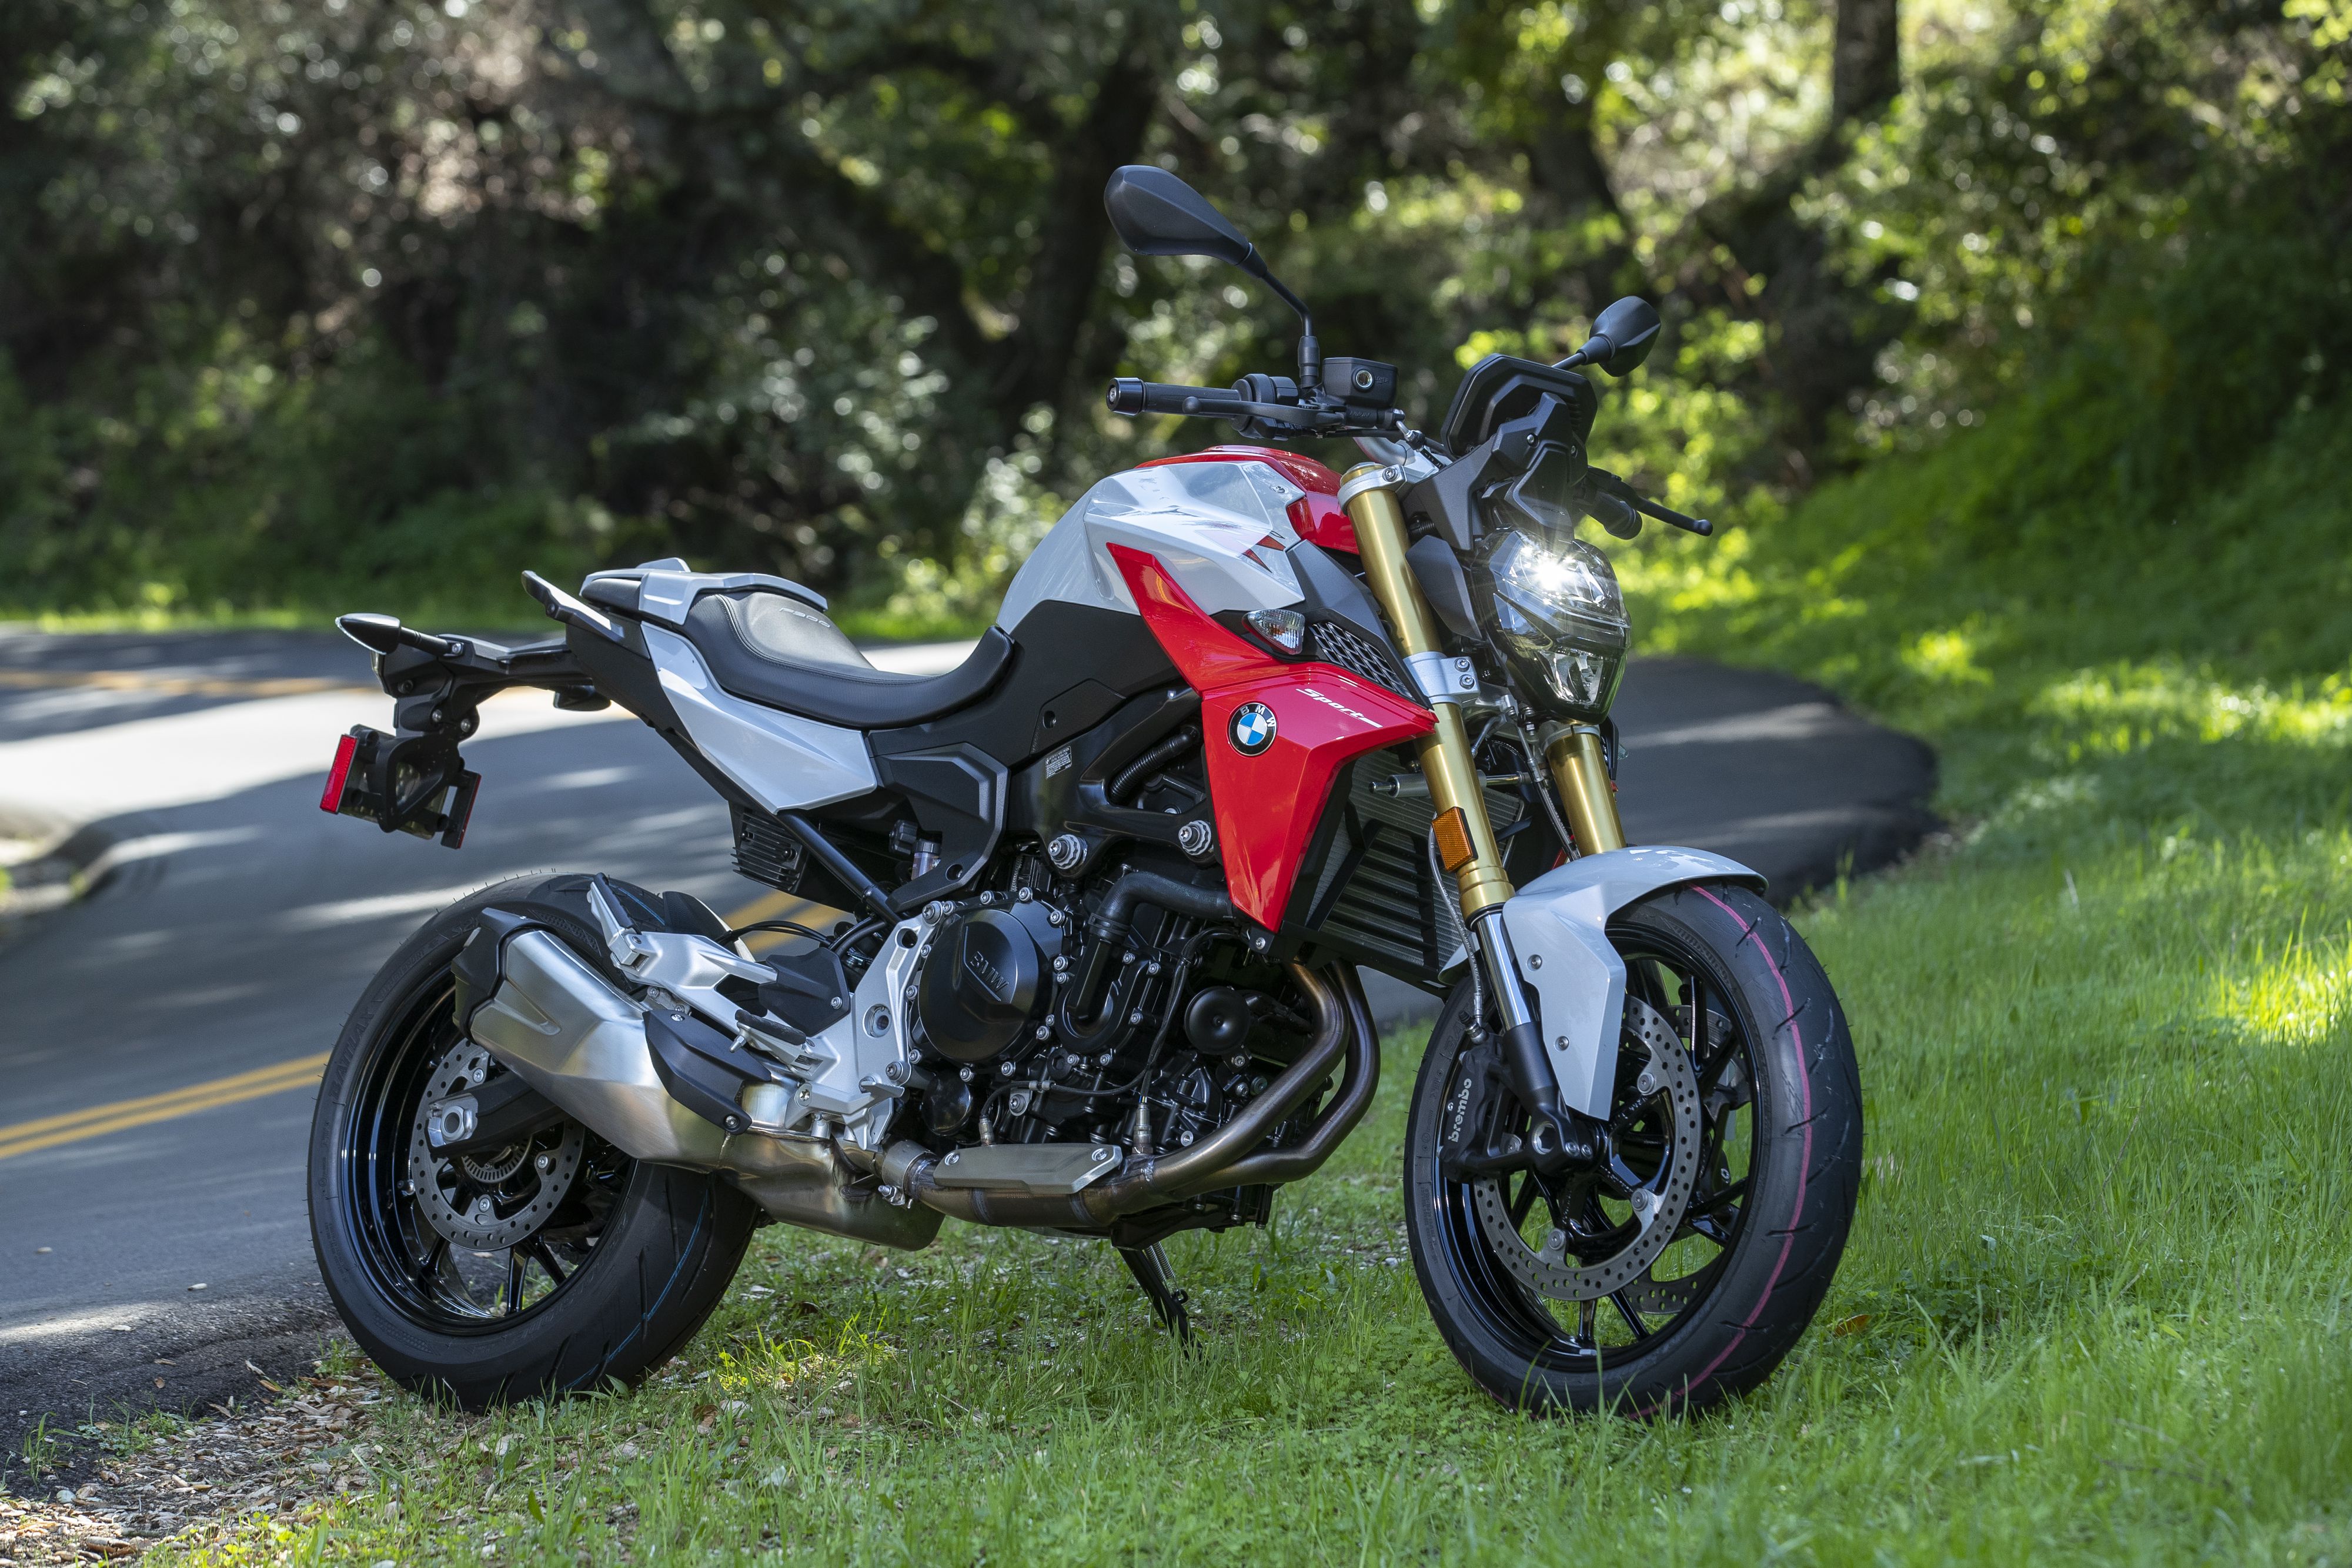 2020 BMW F 900 R First Ride Review | Motorcycle News